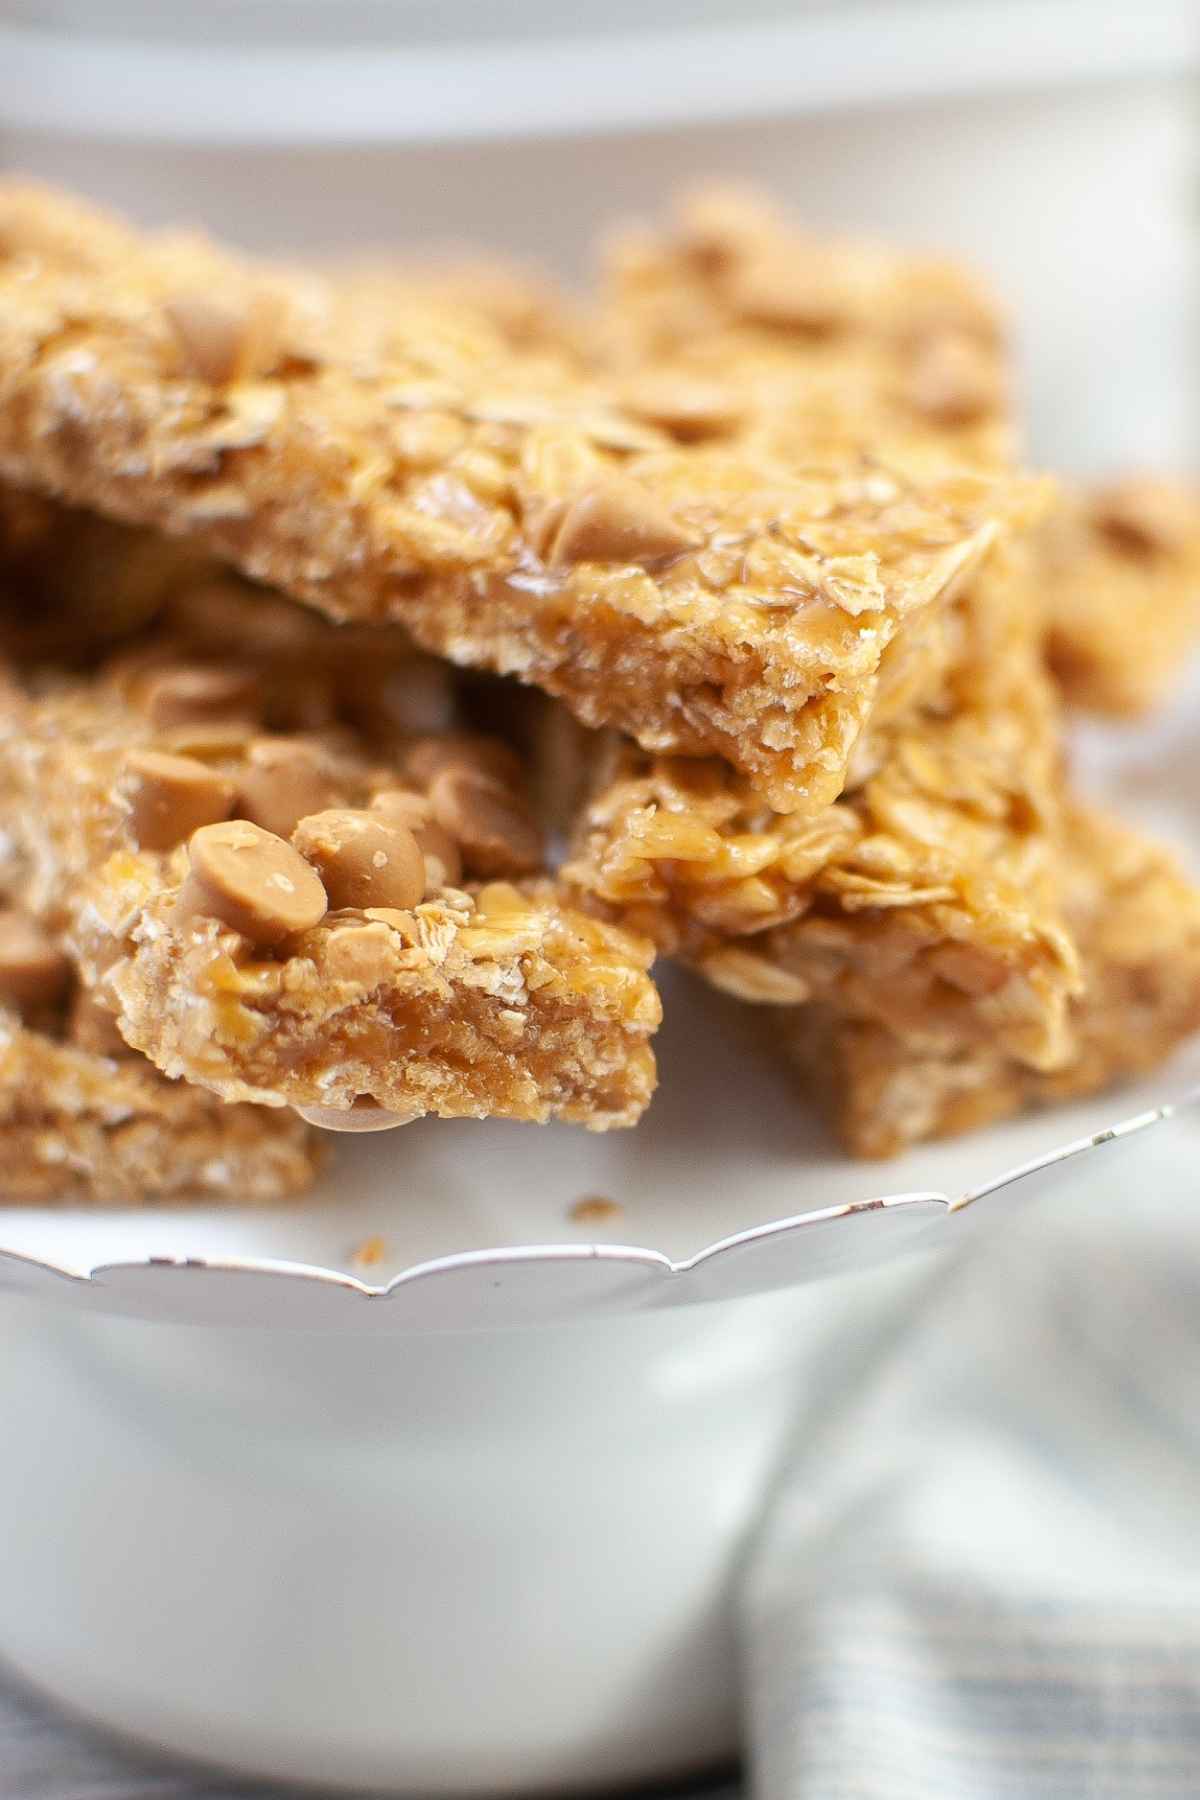 Upclose image of chewy granola bars on a white plate.